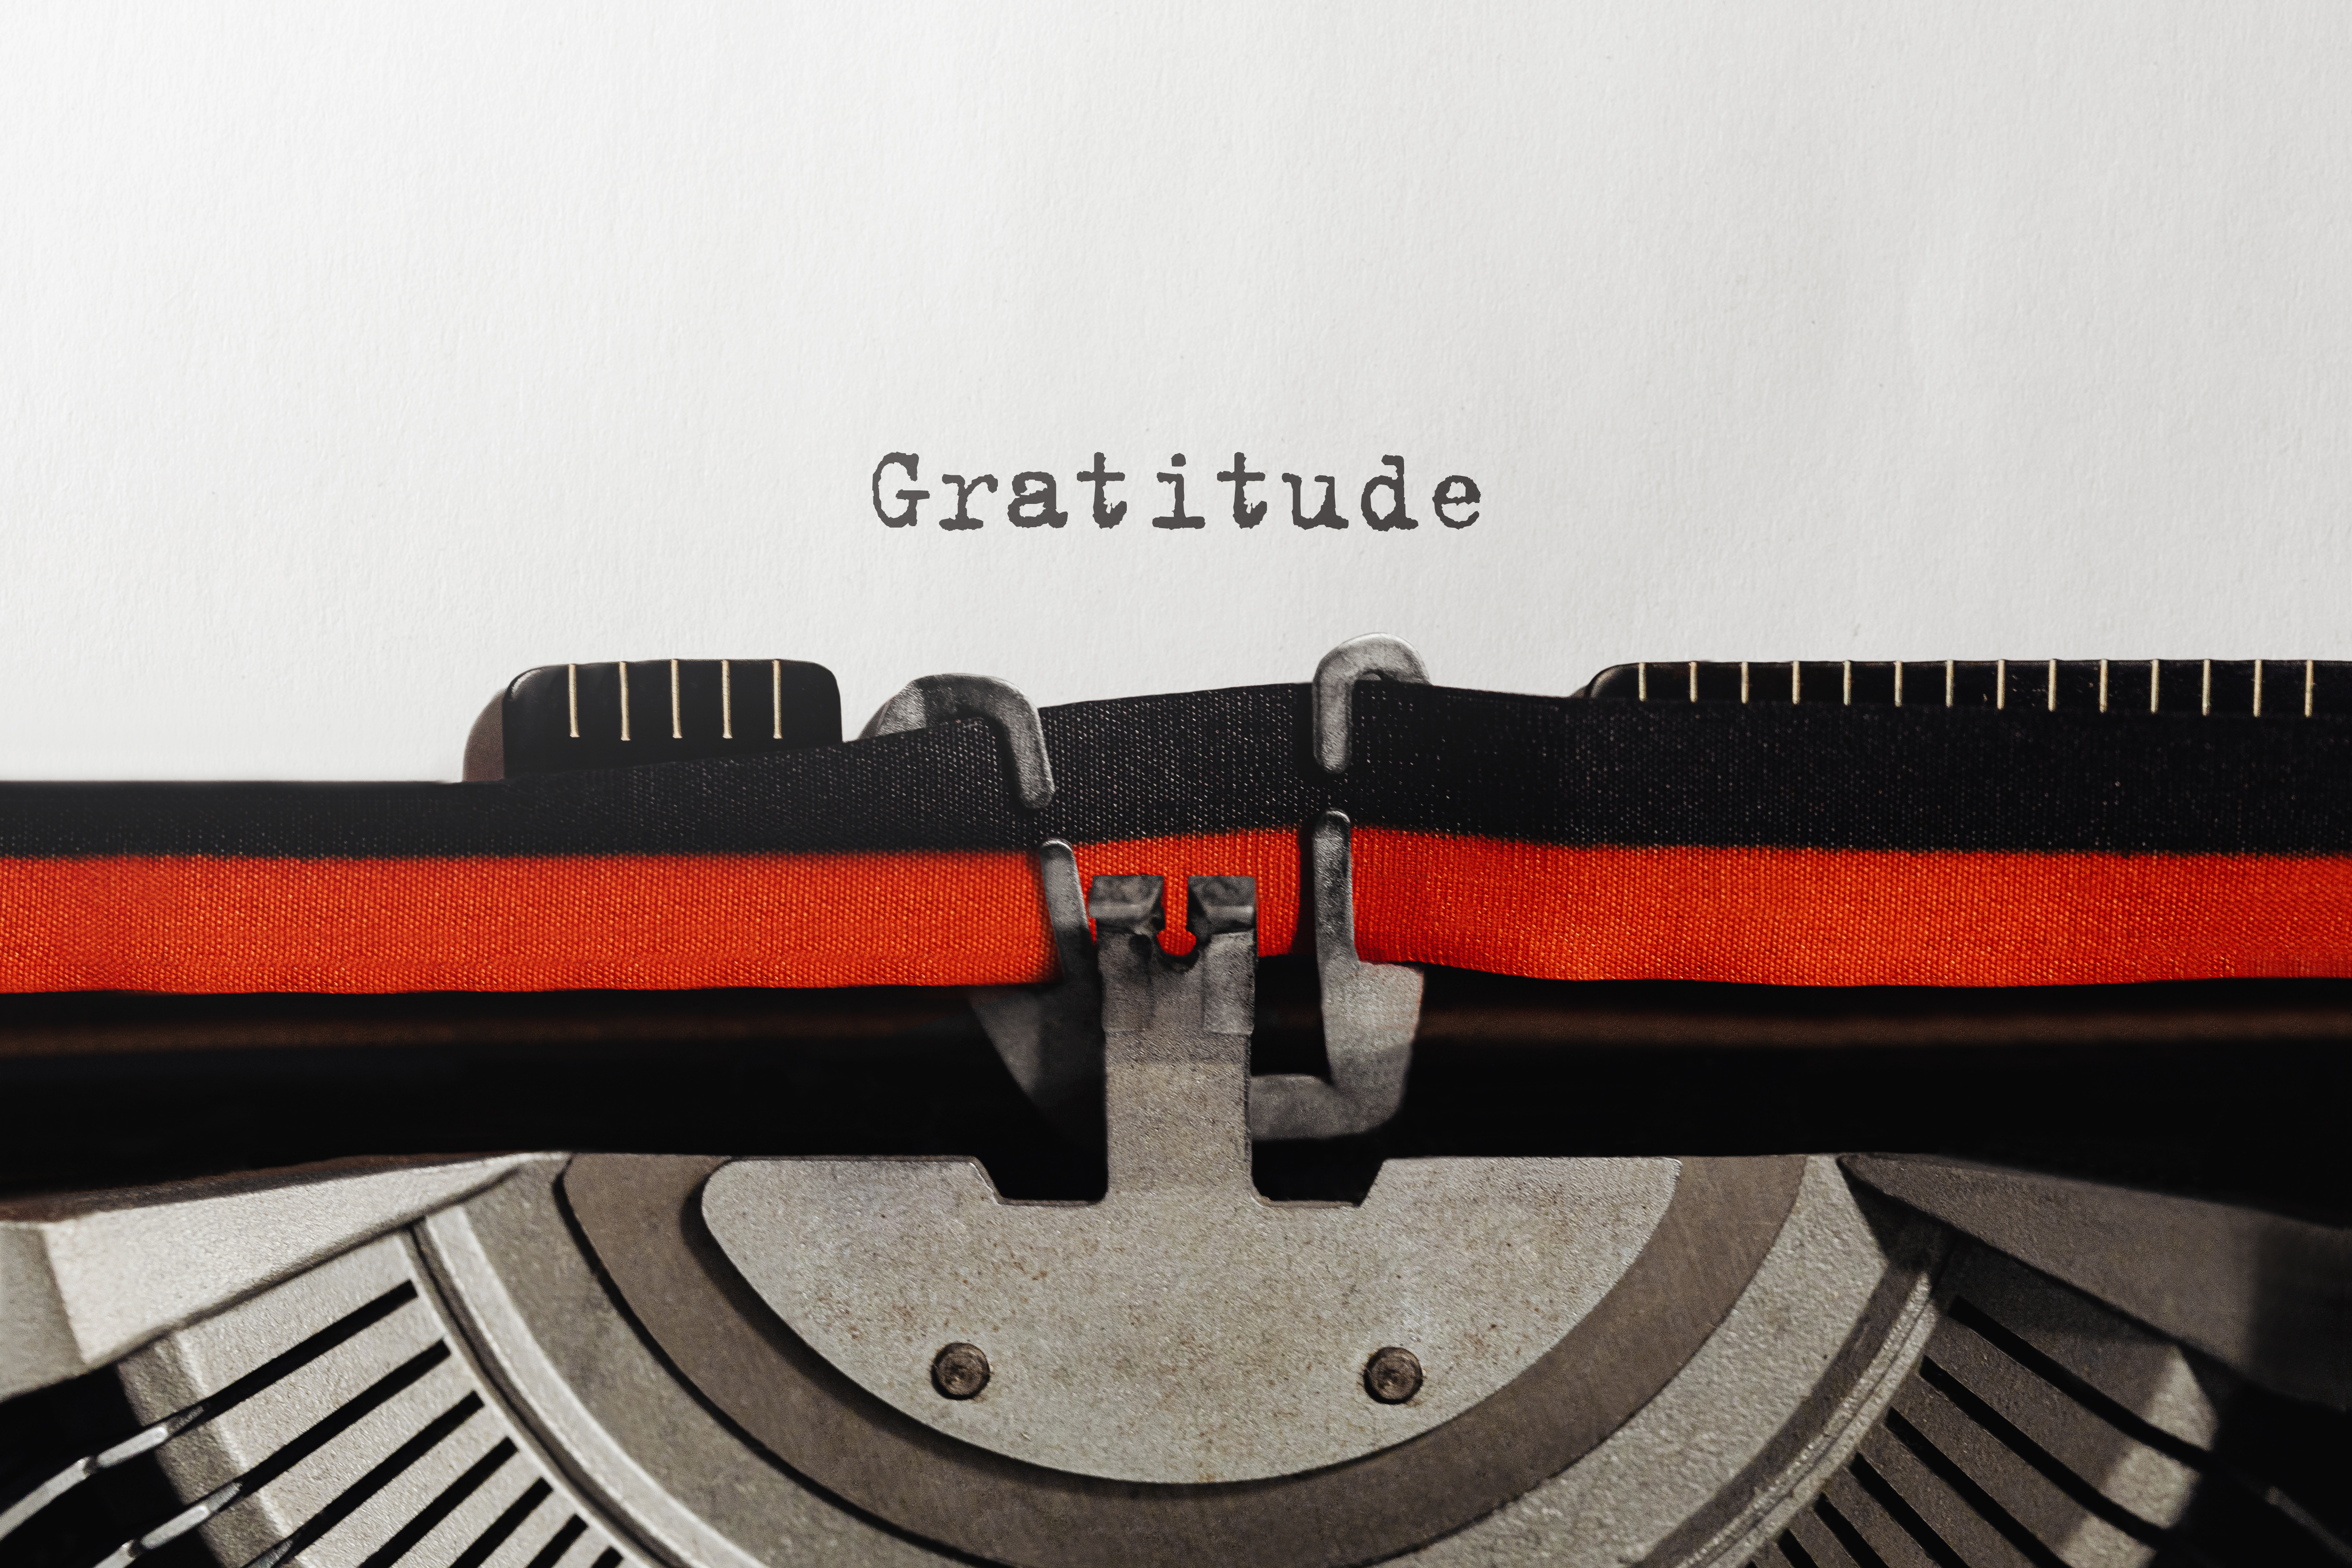 Photo of the Word "Gratitude" Typed on A Vintage Typewriter